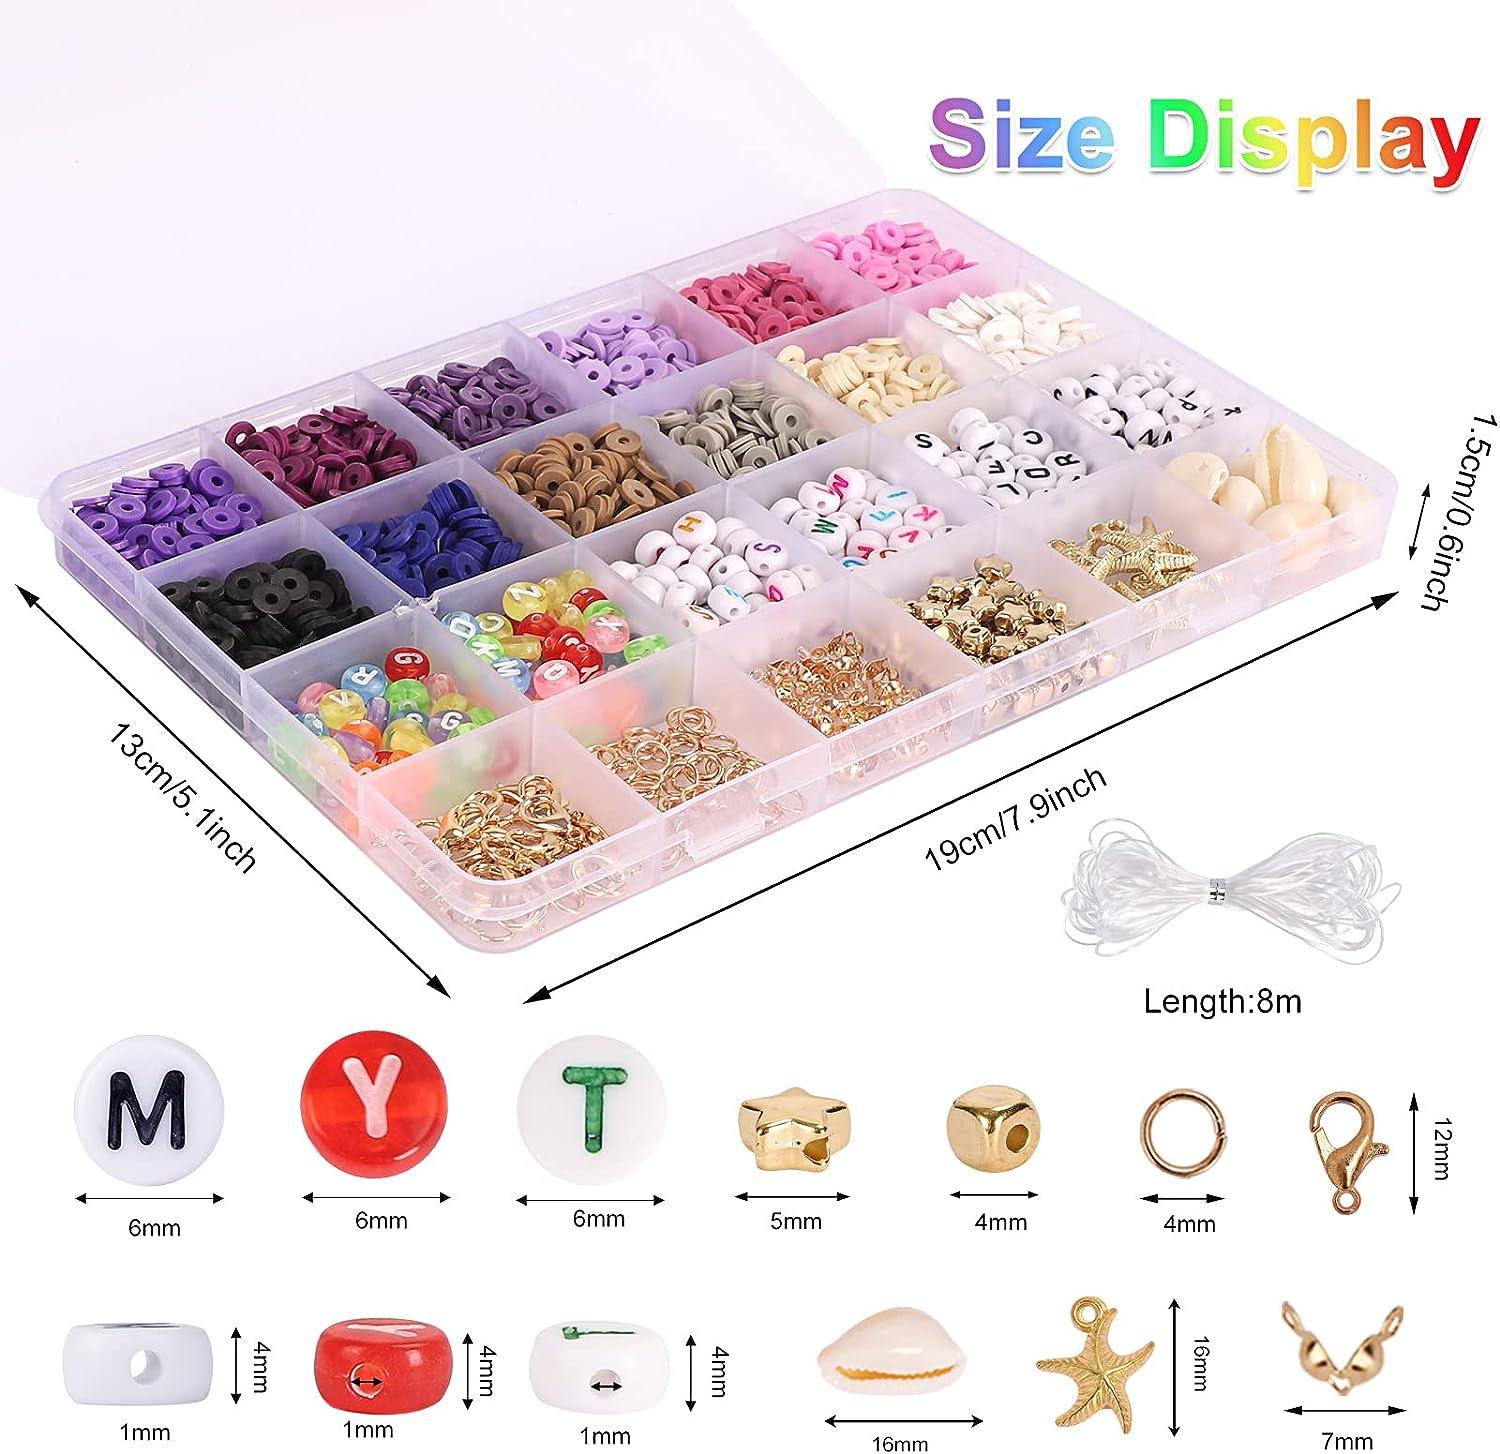 QUEFE 5000pcs Clay Heishi Beads for Bracelet Jewelry Making, Polymer Flat Round Clay Beads Kit with 240pcs Letter Beads, Pendant Charms and Elastic